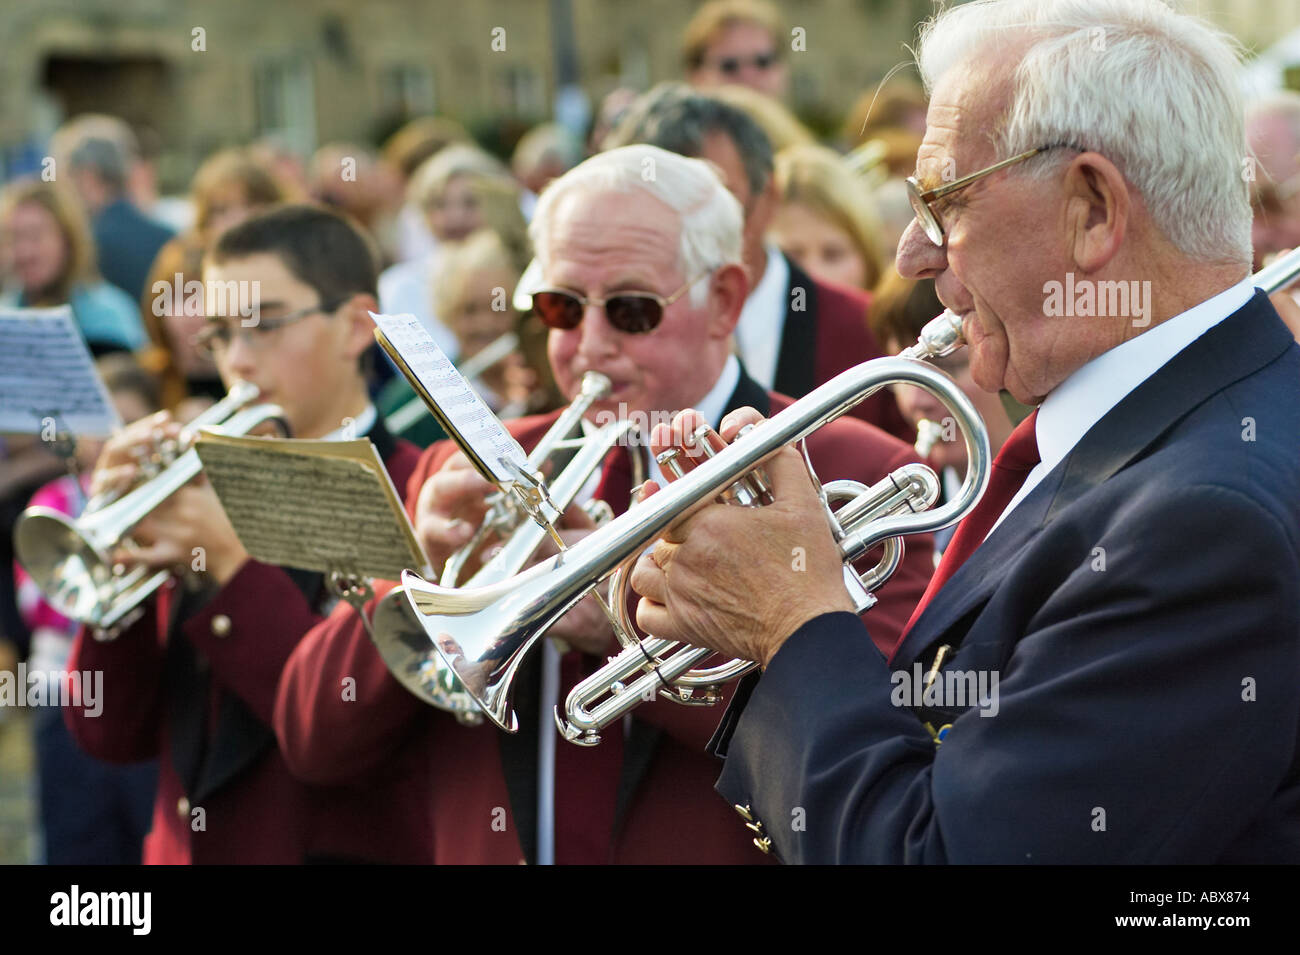 Brass band entertain a crowd in Yorkshire, England, UK Stock Photo